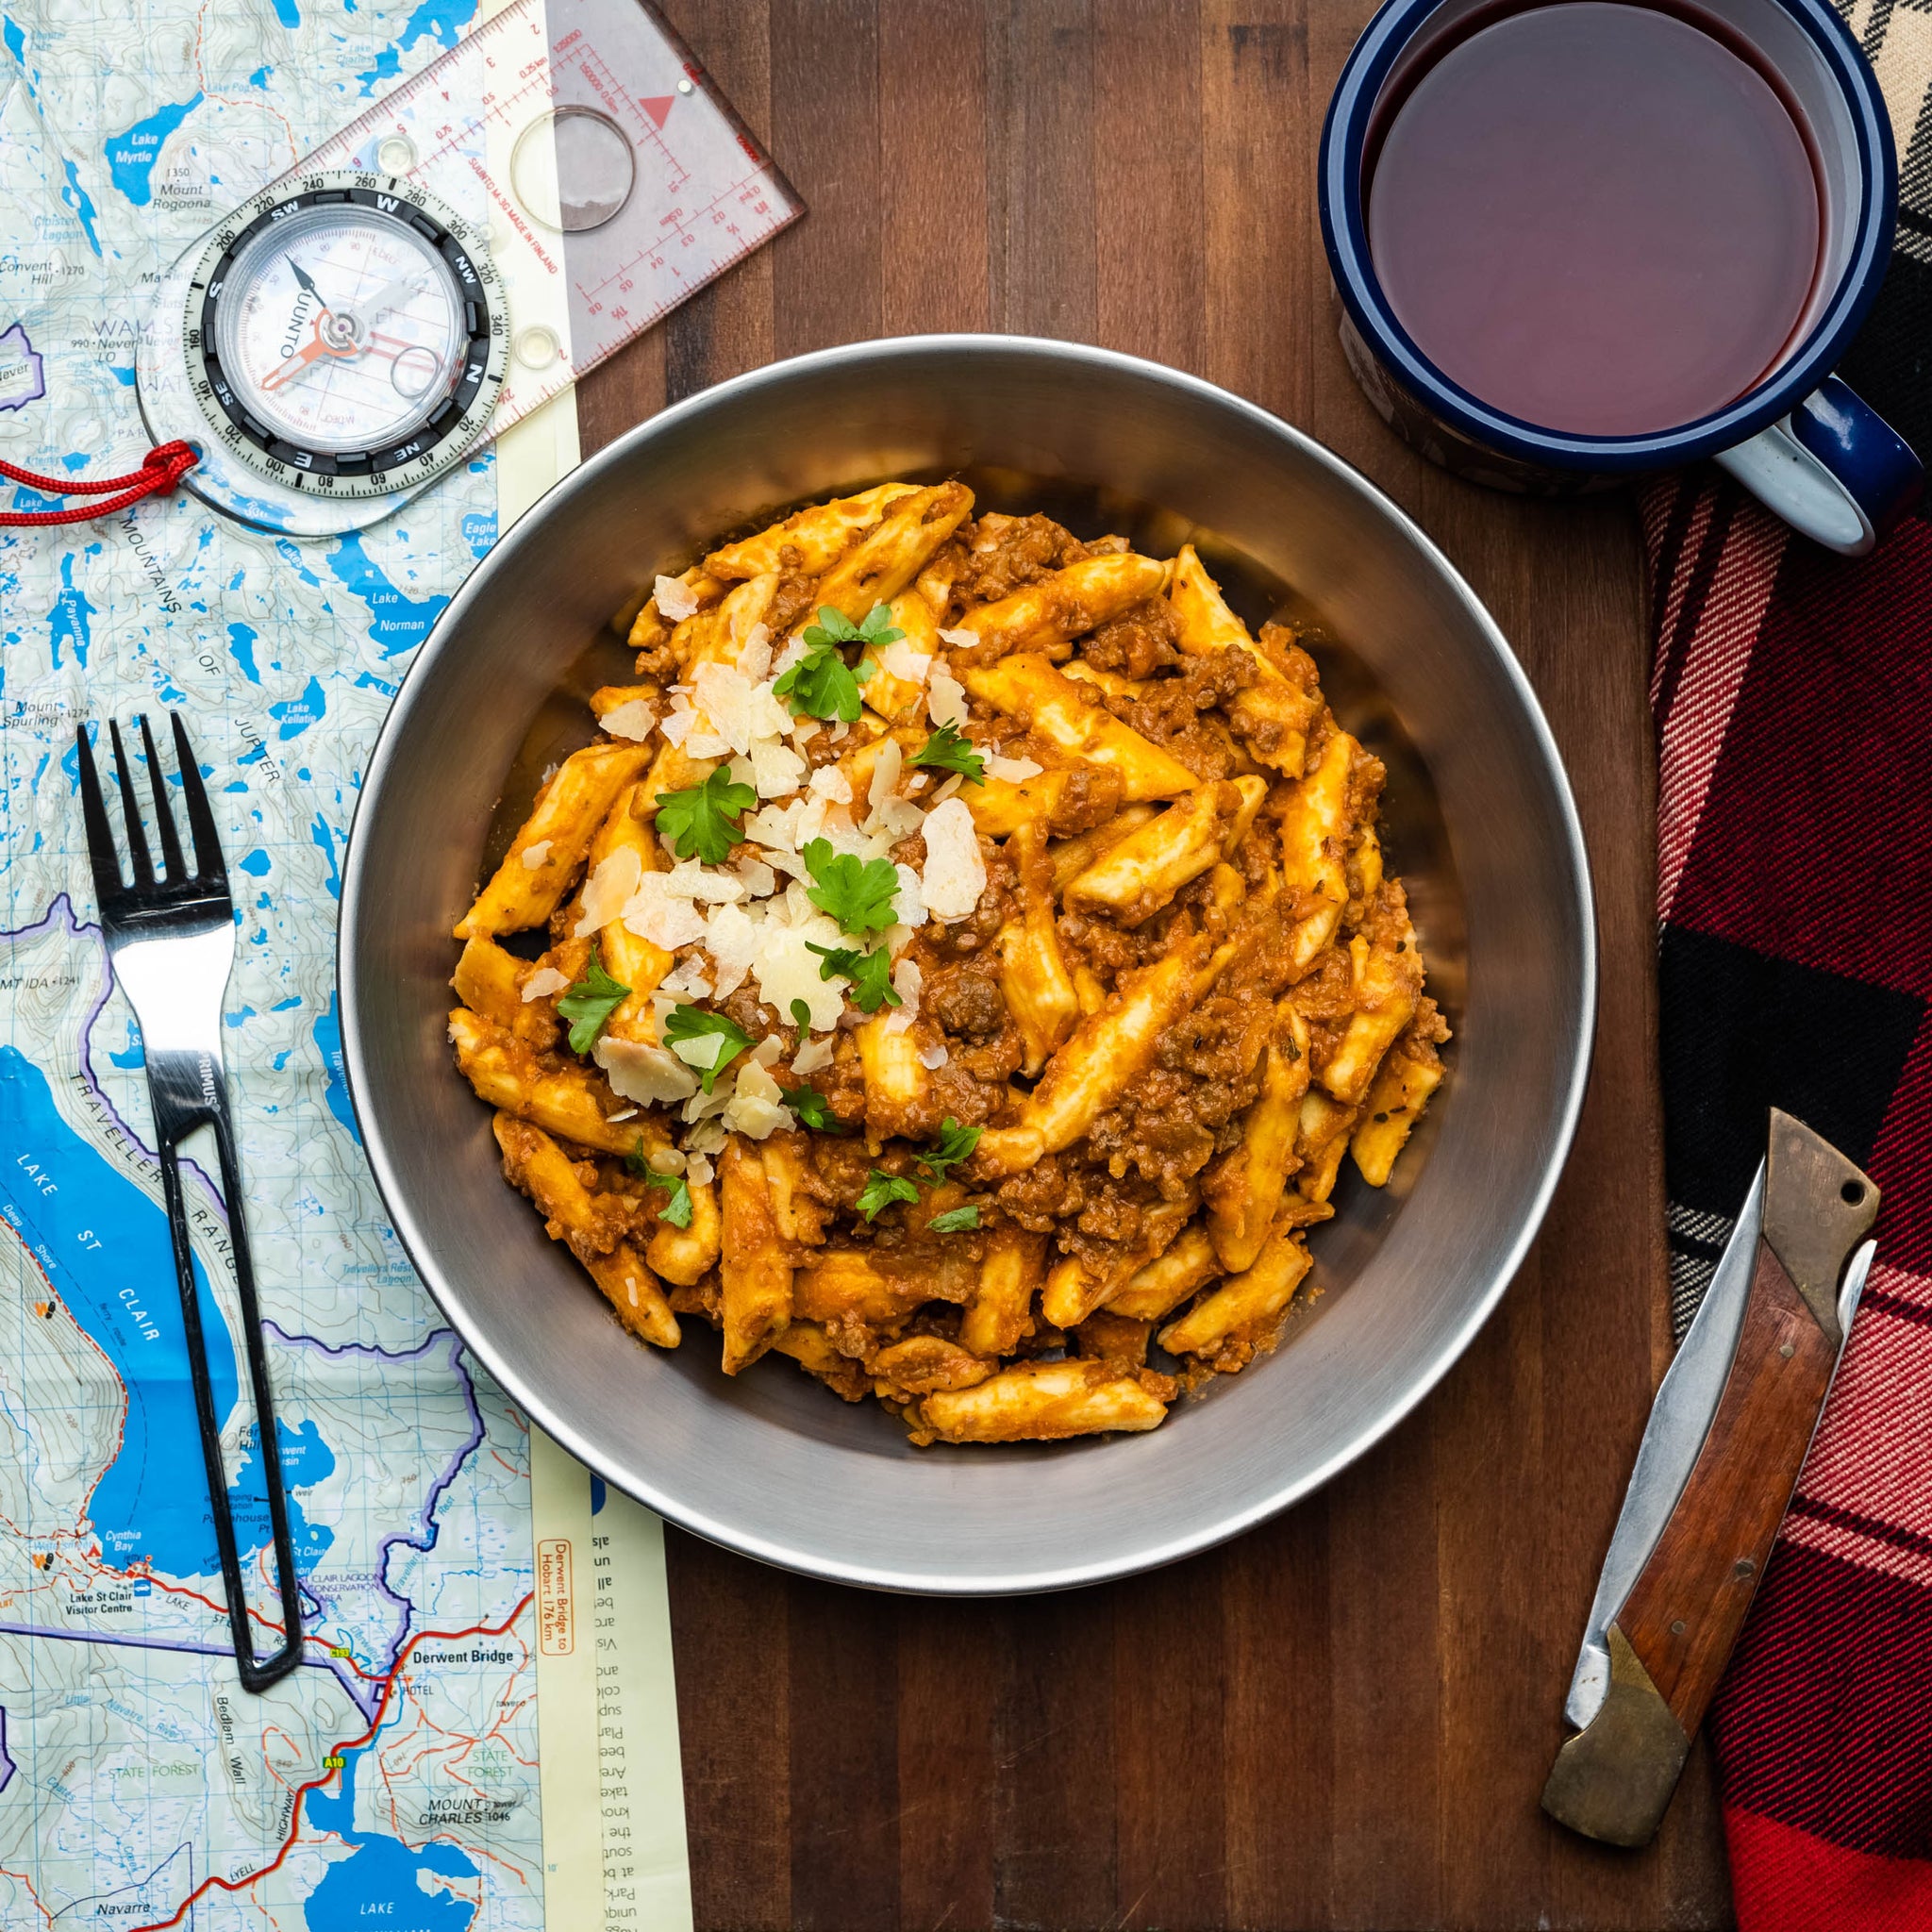 Campers Pantry Penne Bolognese - Expedition Edition